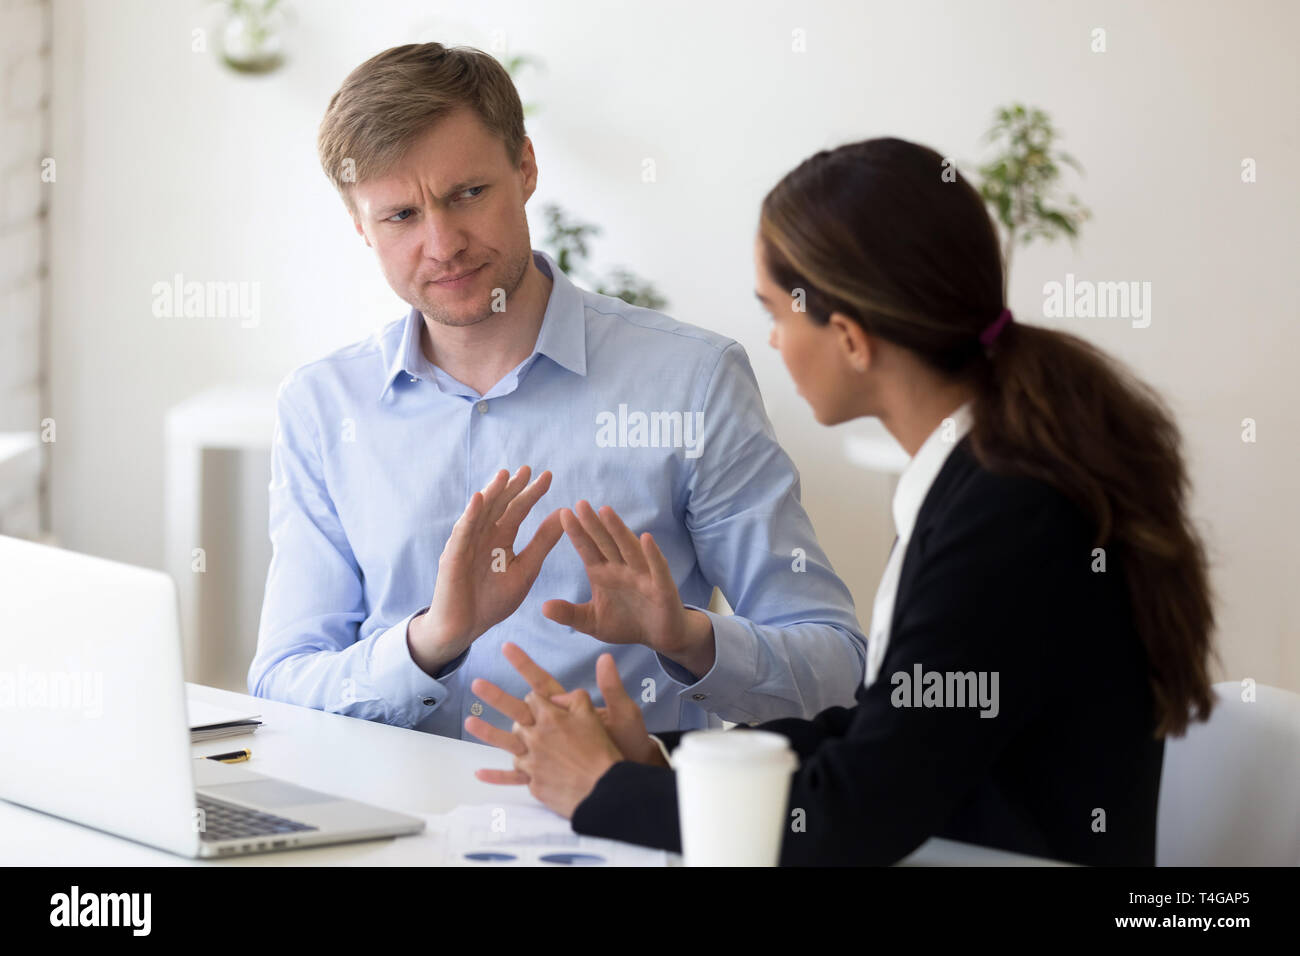 Millennial businessman rejecting giving interview to journalist Stock Photo